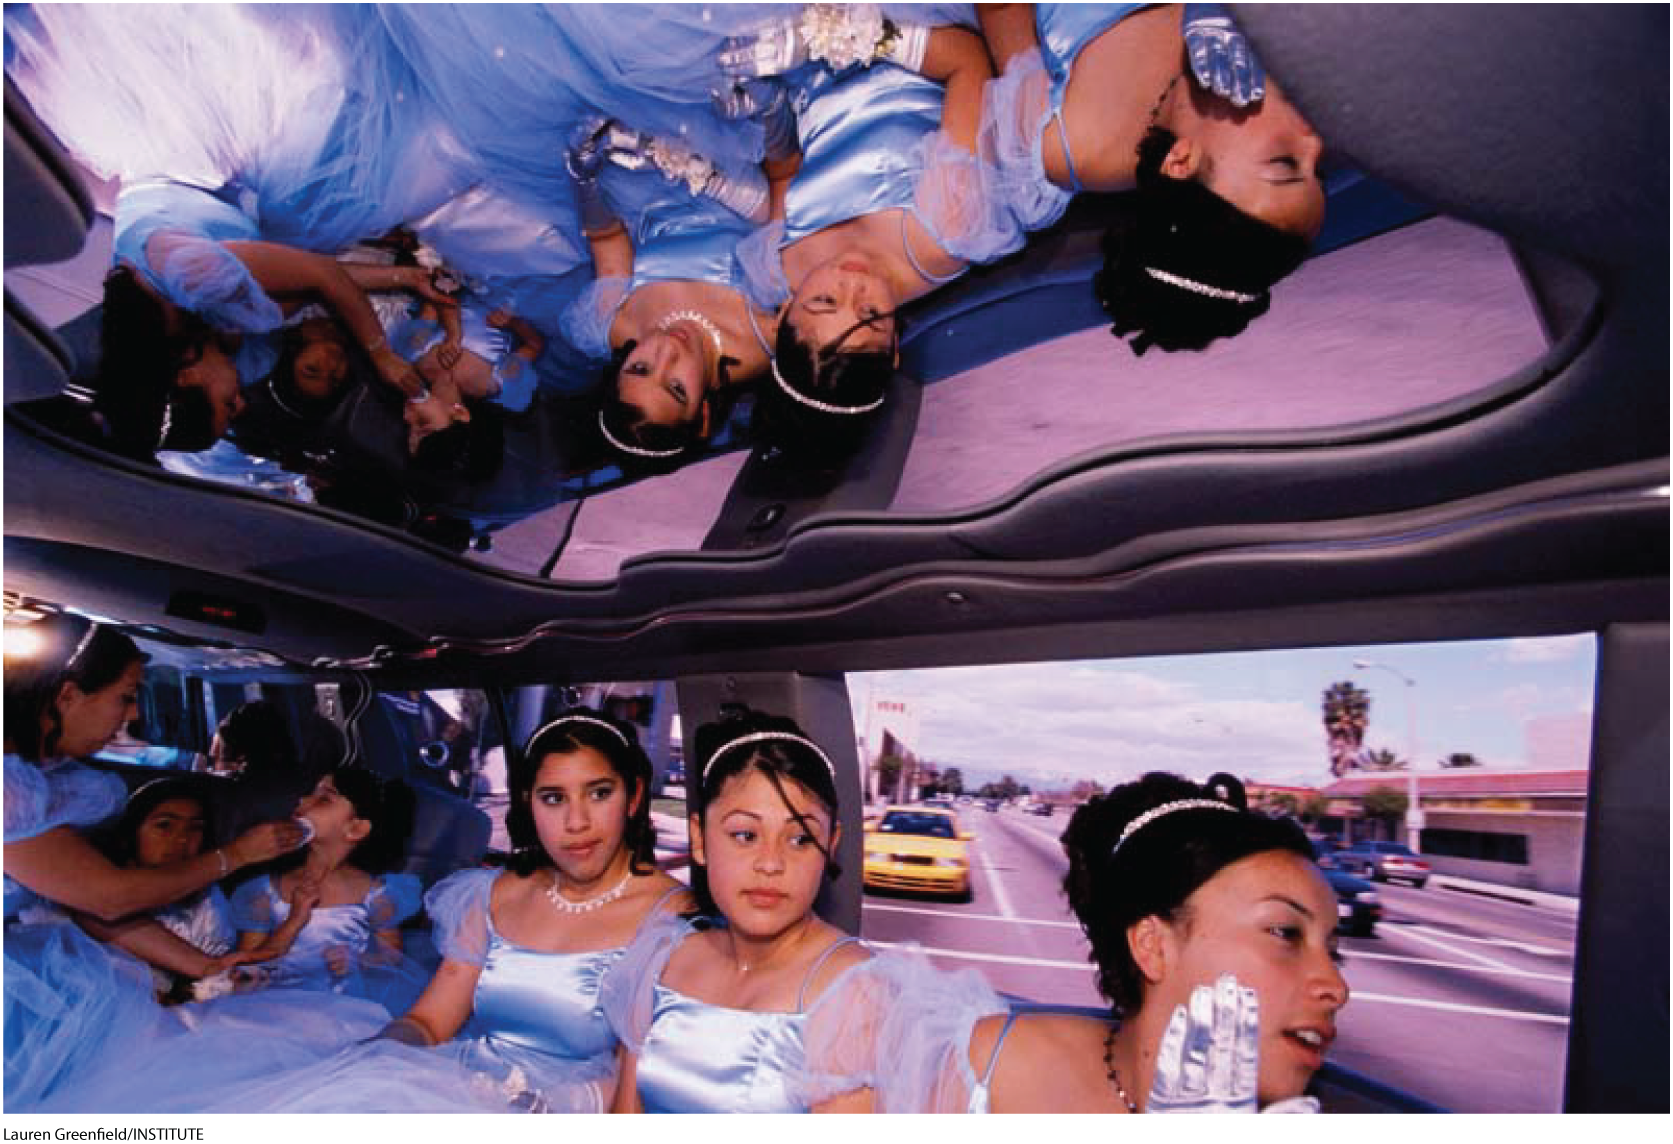 A photo shows a group of girls dressed in similar gowns sitting inside a limousine.